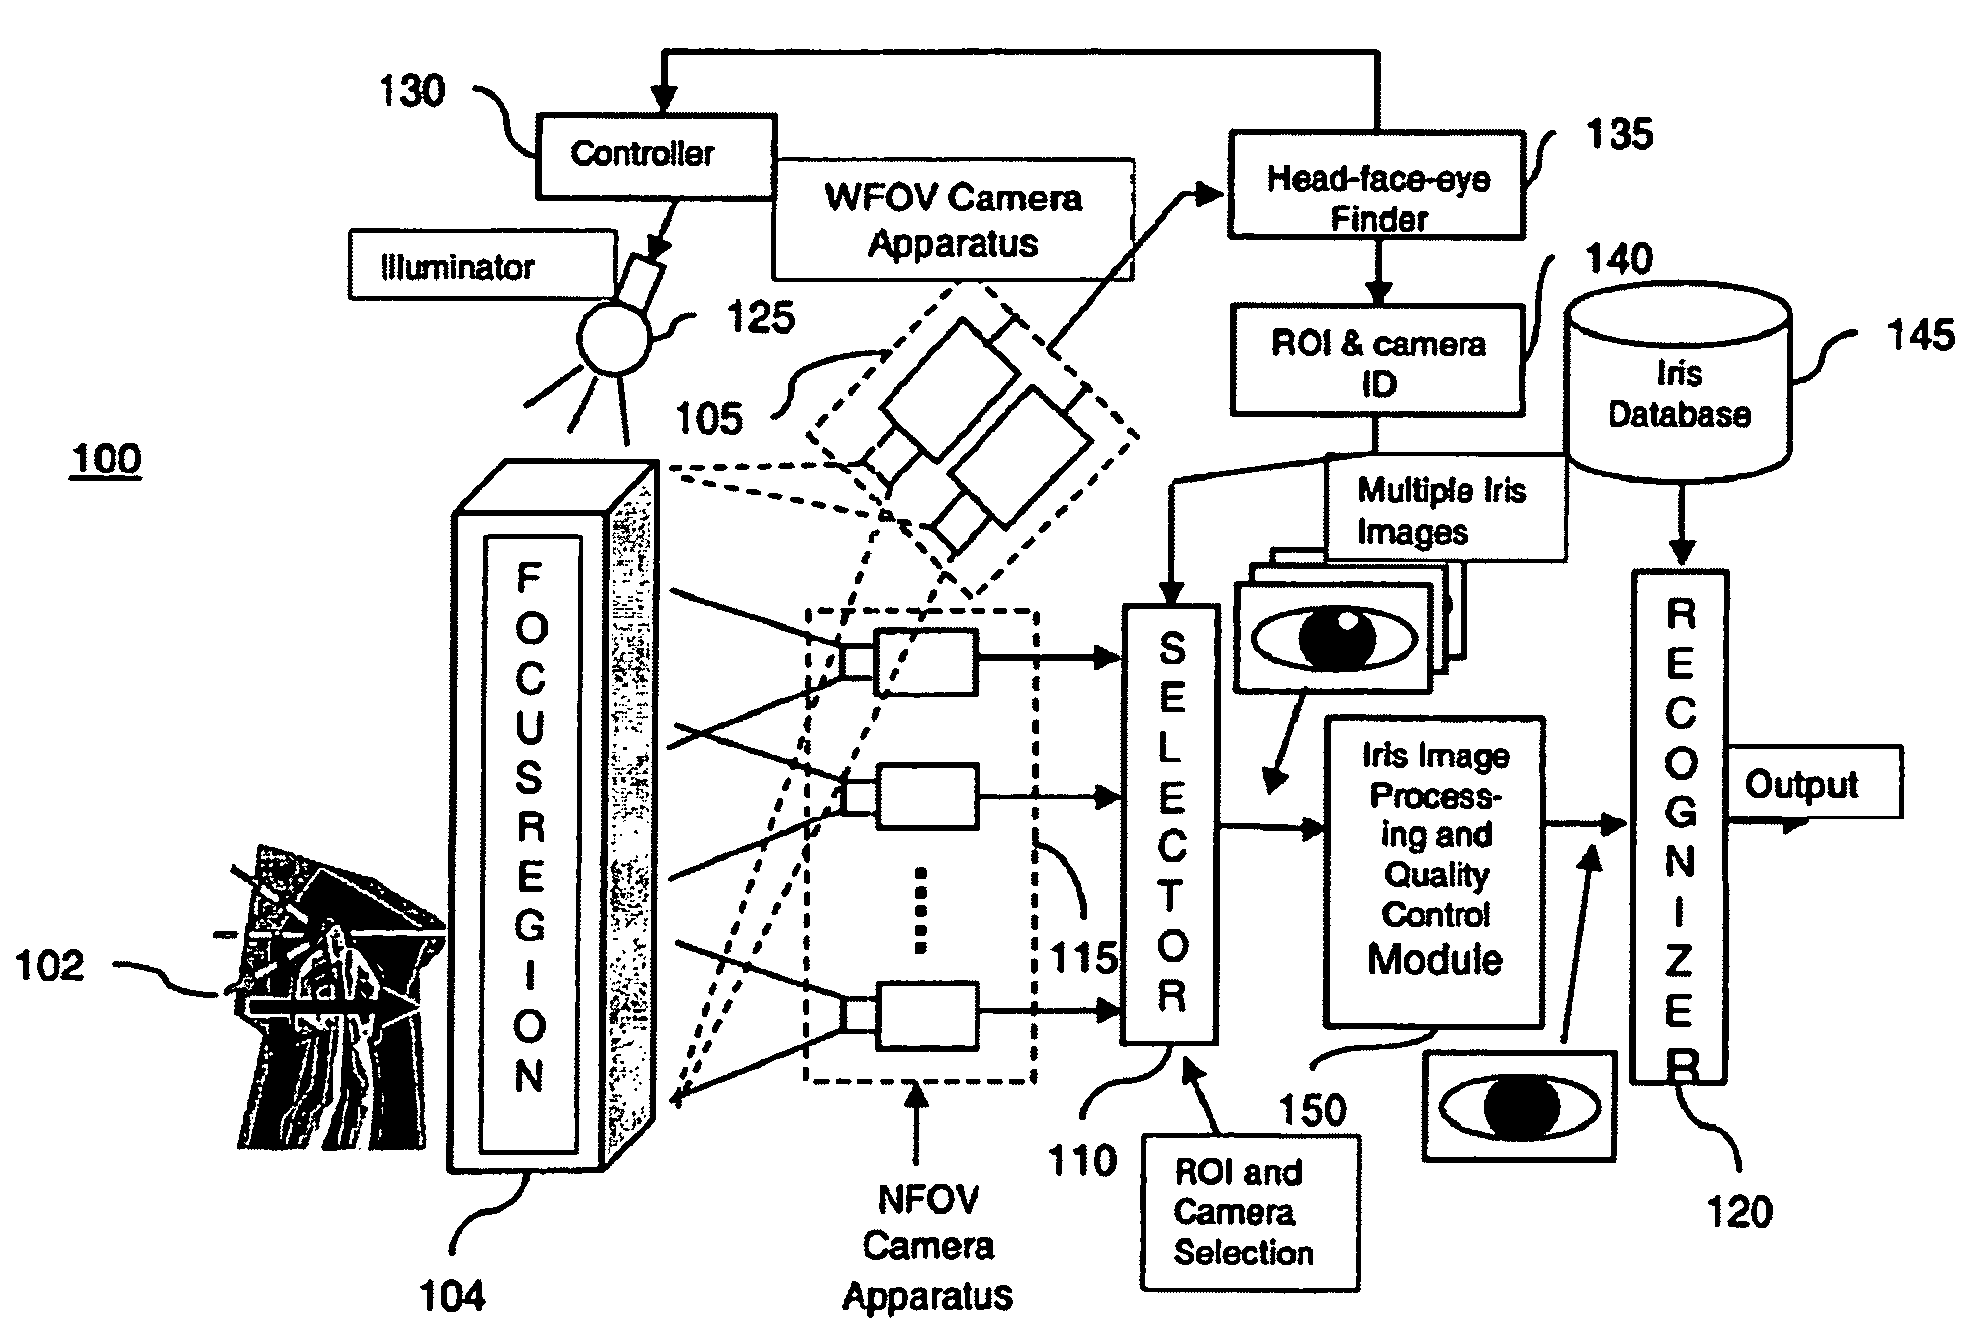 Iris recognition for a secure facility